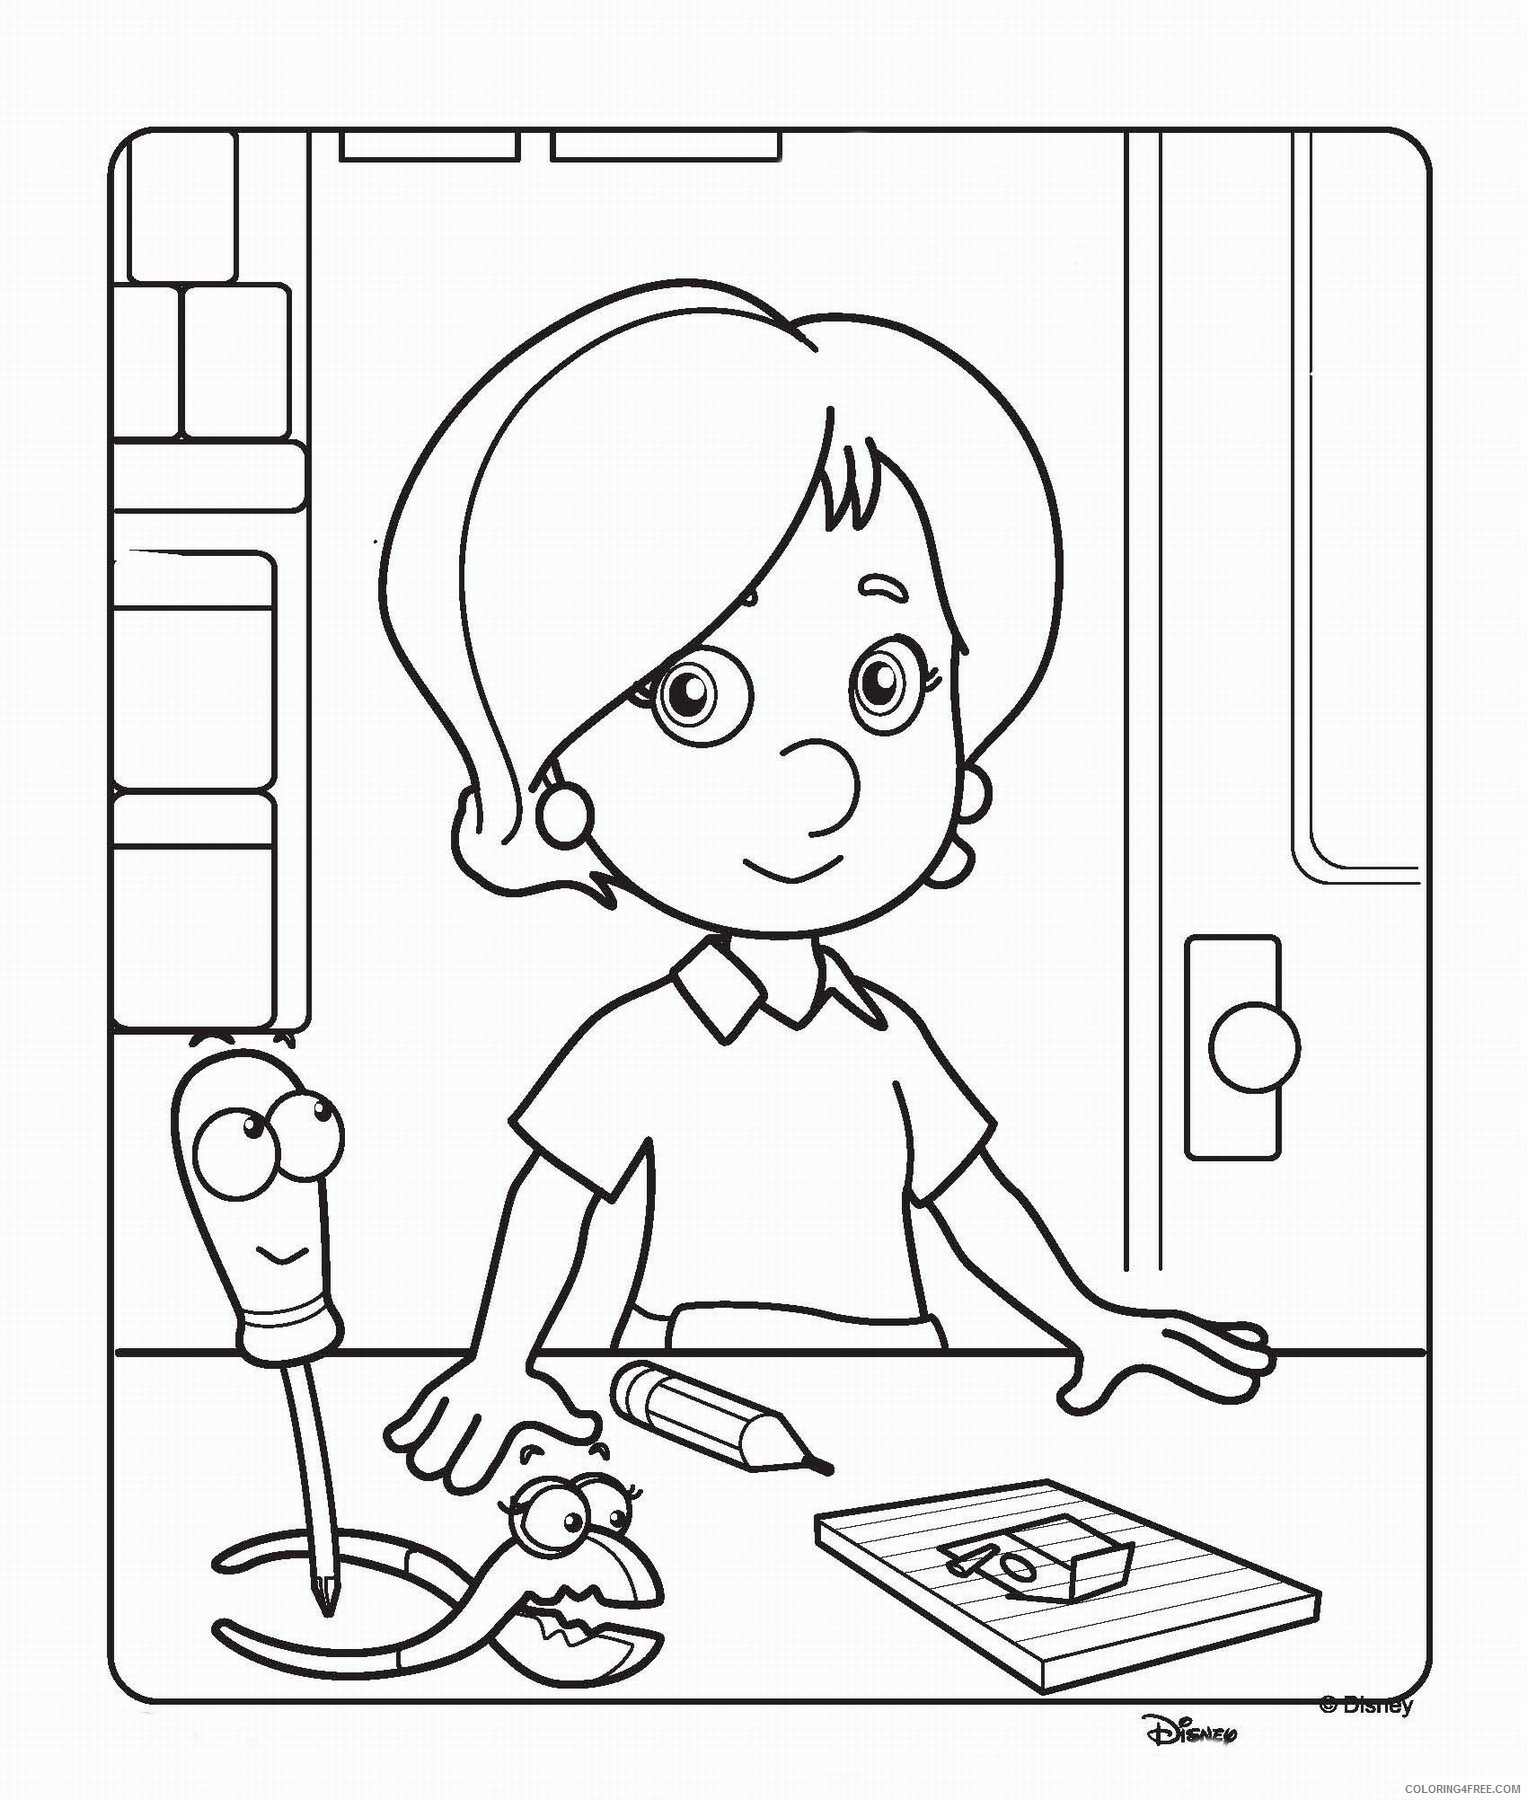 Bob the Builder Coloring Pages TV Film bob the builder_38 Printable 2020 00987 Coloring4free